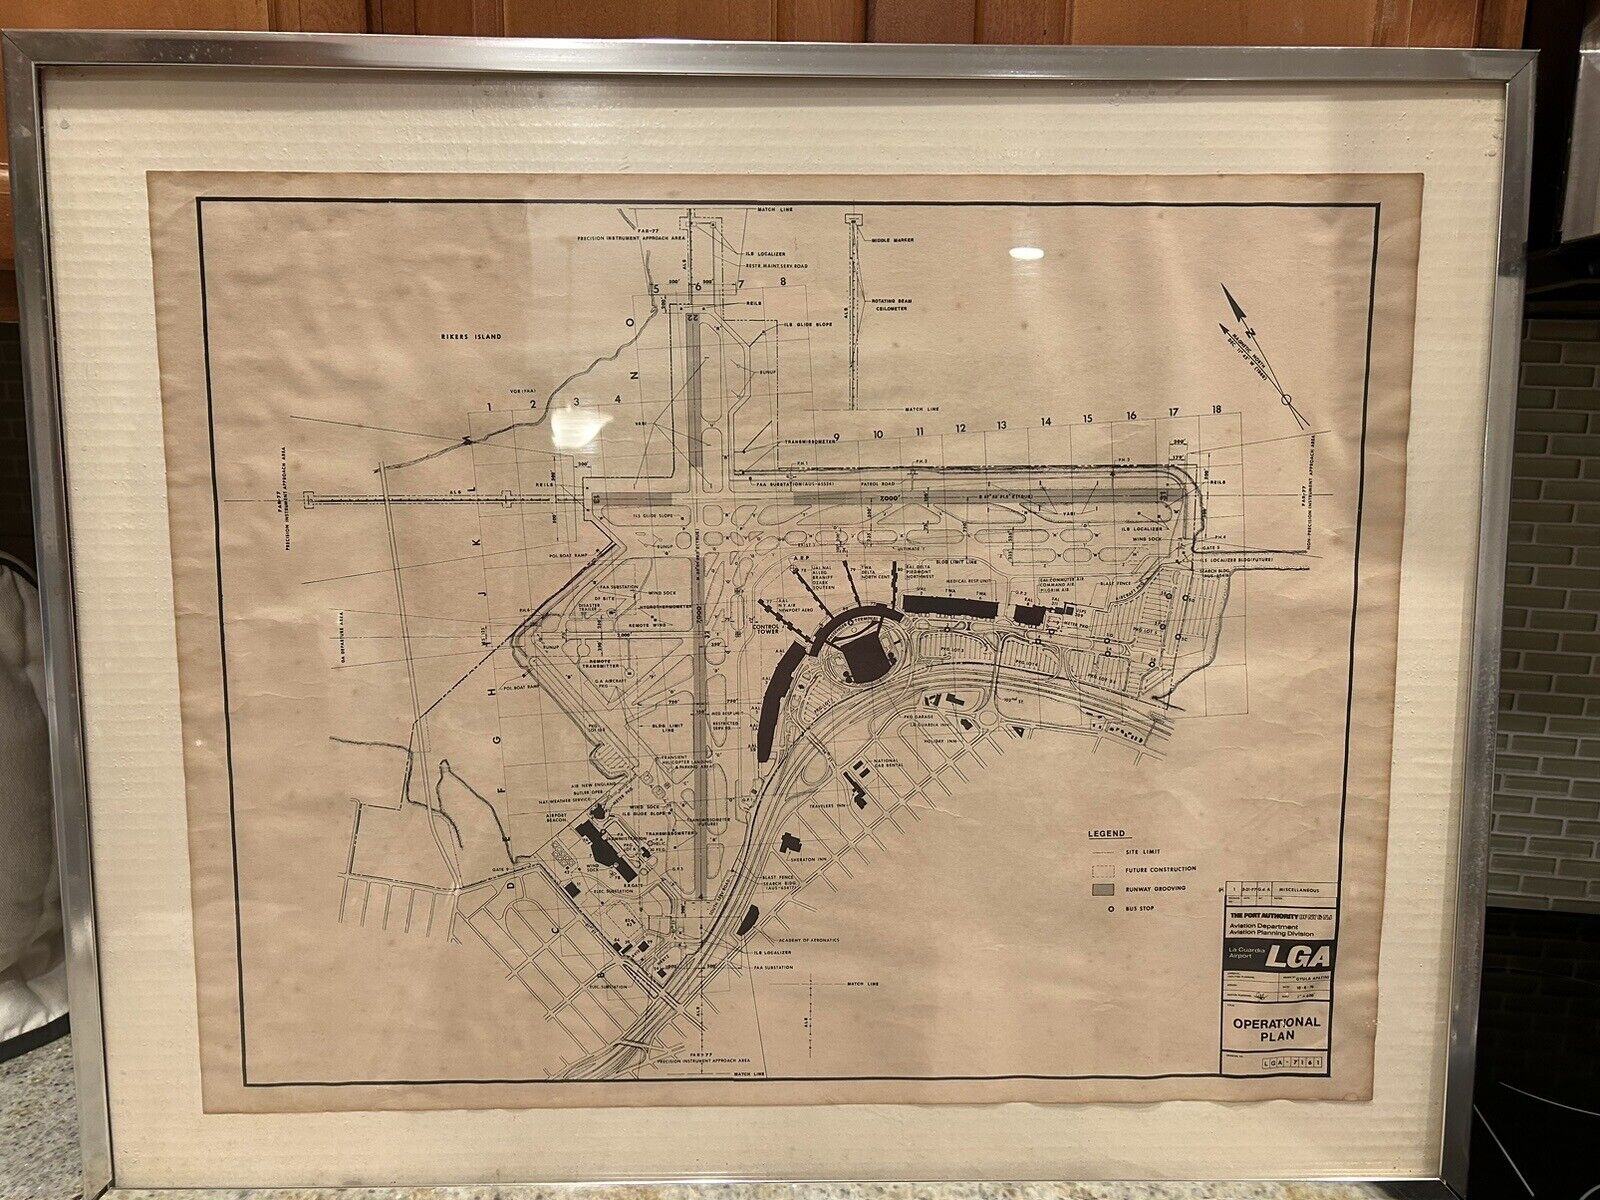 LaGuardia Airport Framed (Airlines) Operational Plan 3/31/1977